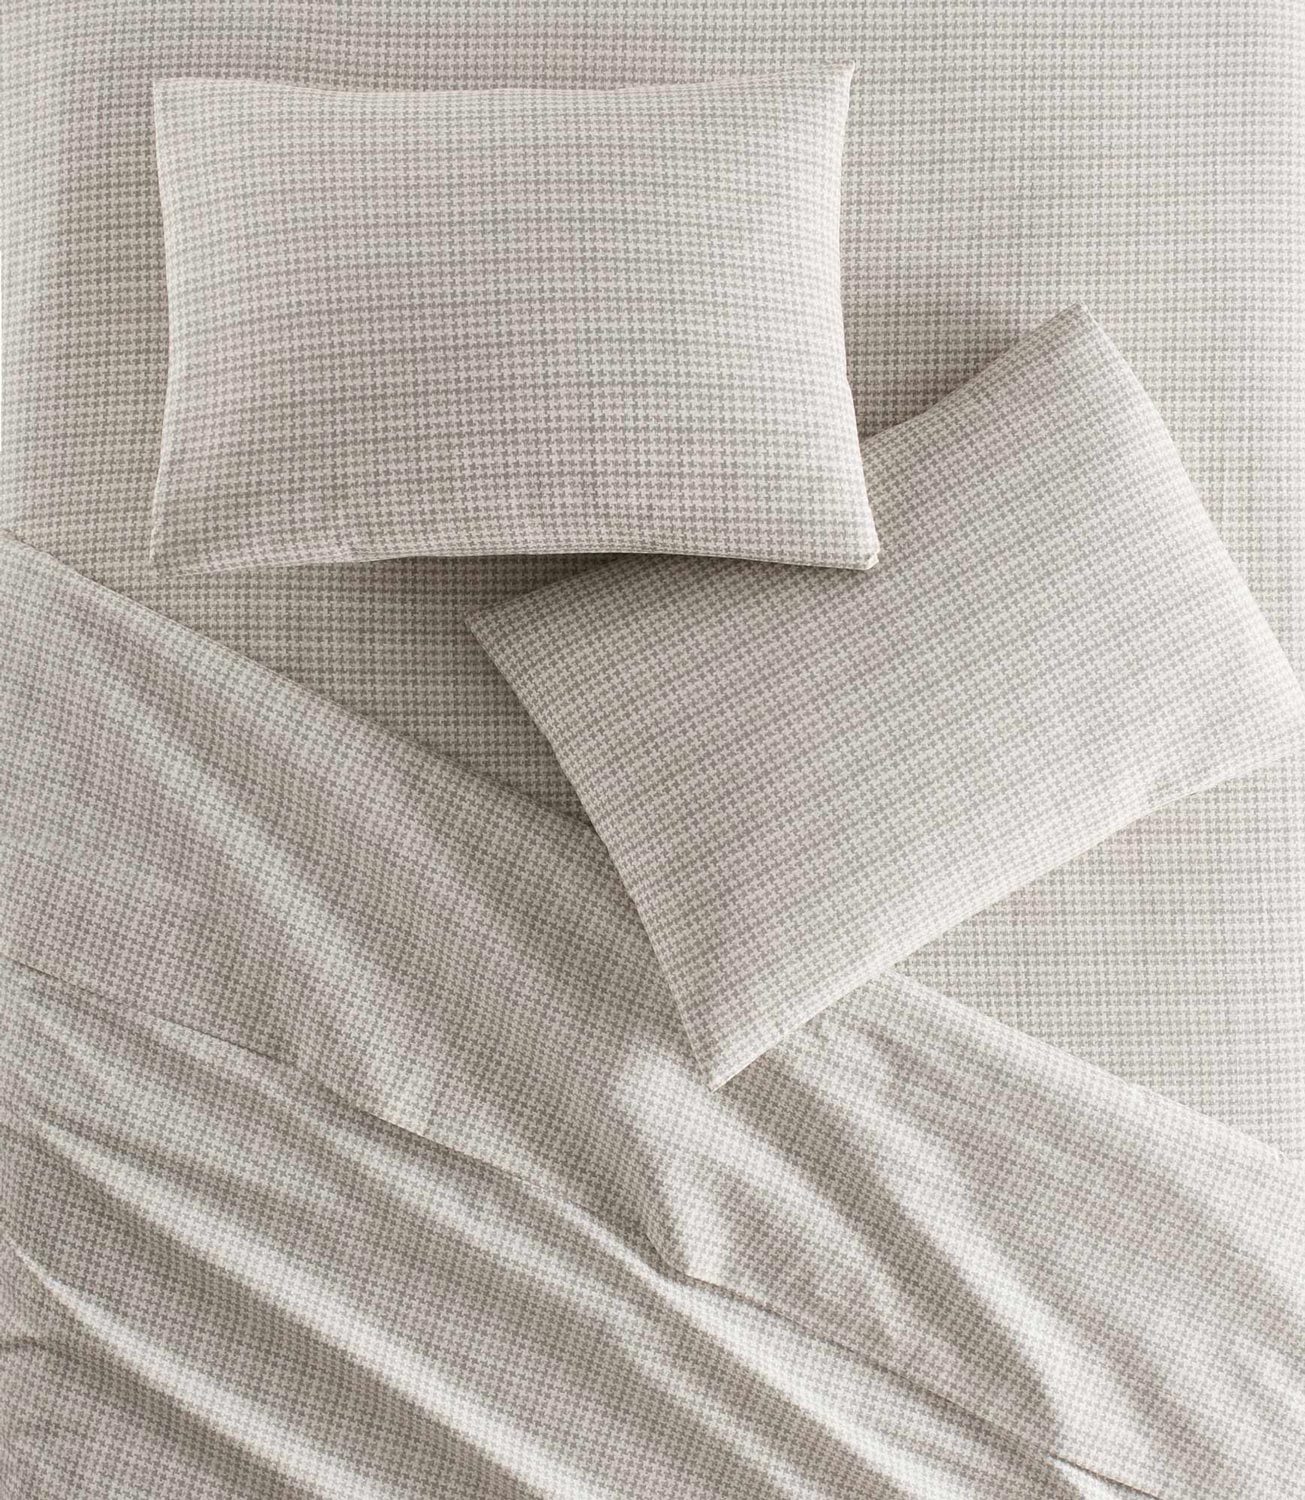 Buy wholesale 80 Thread Count Cotton Percale Fitted Sheet